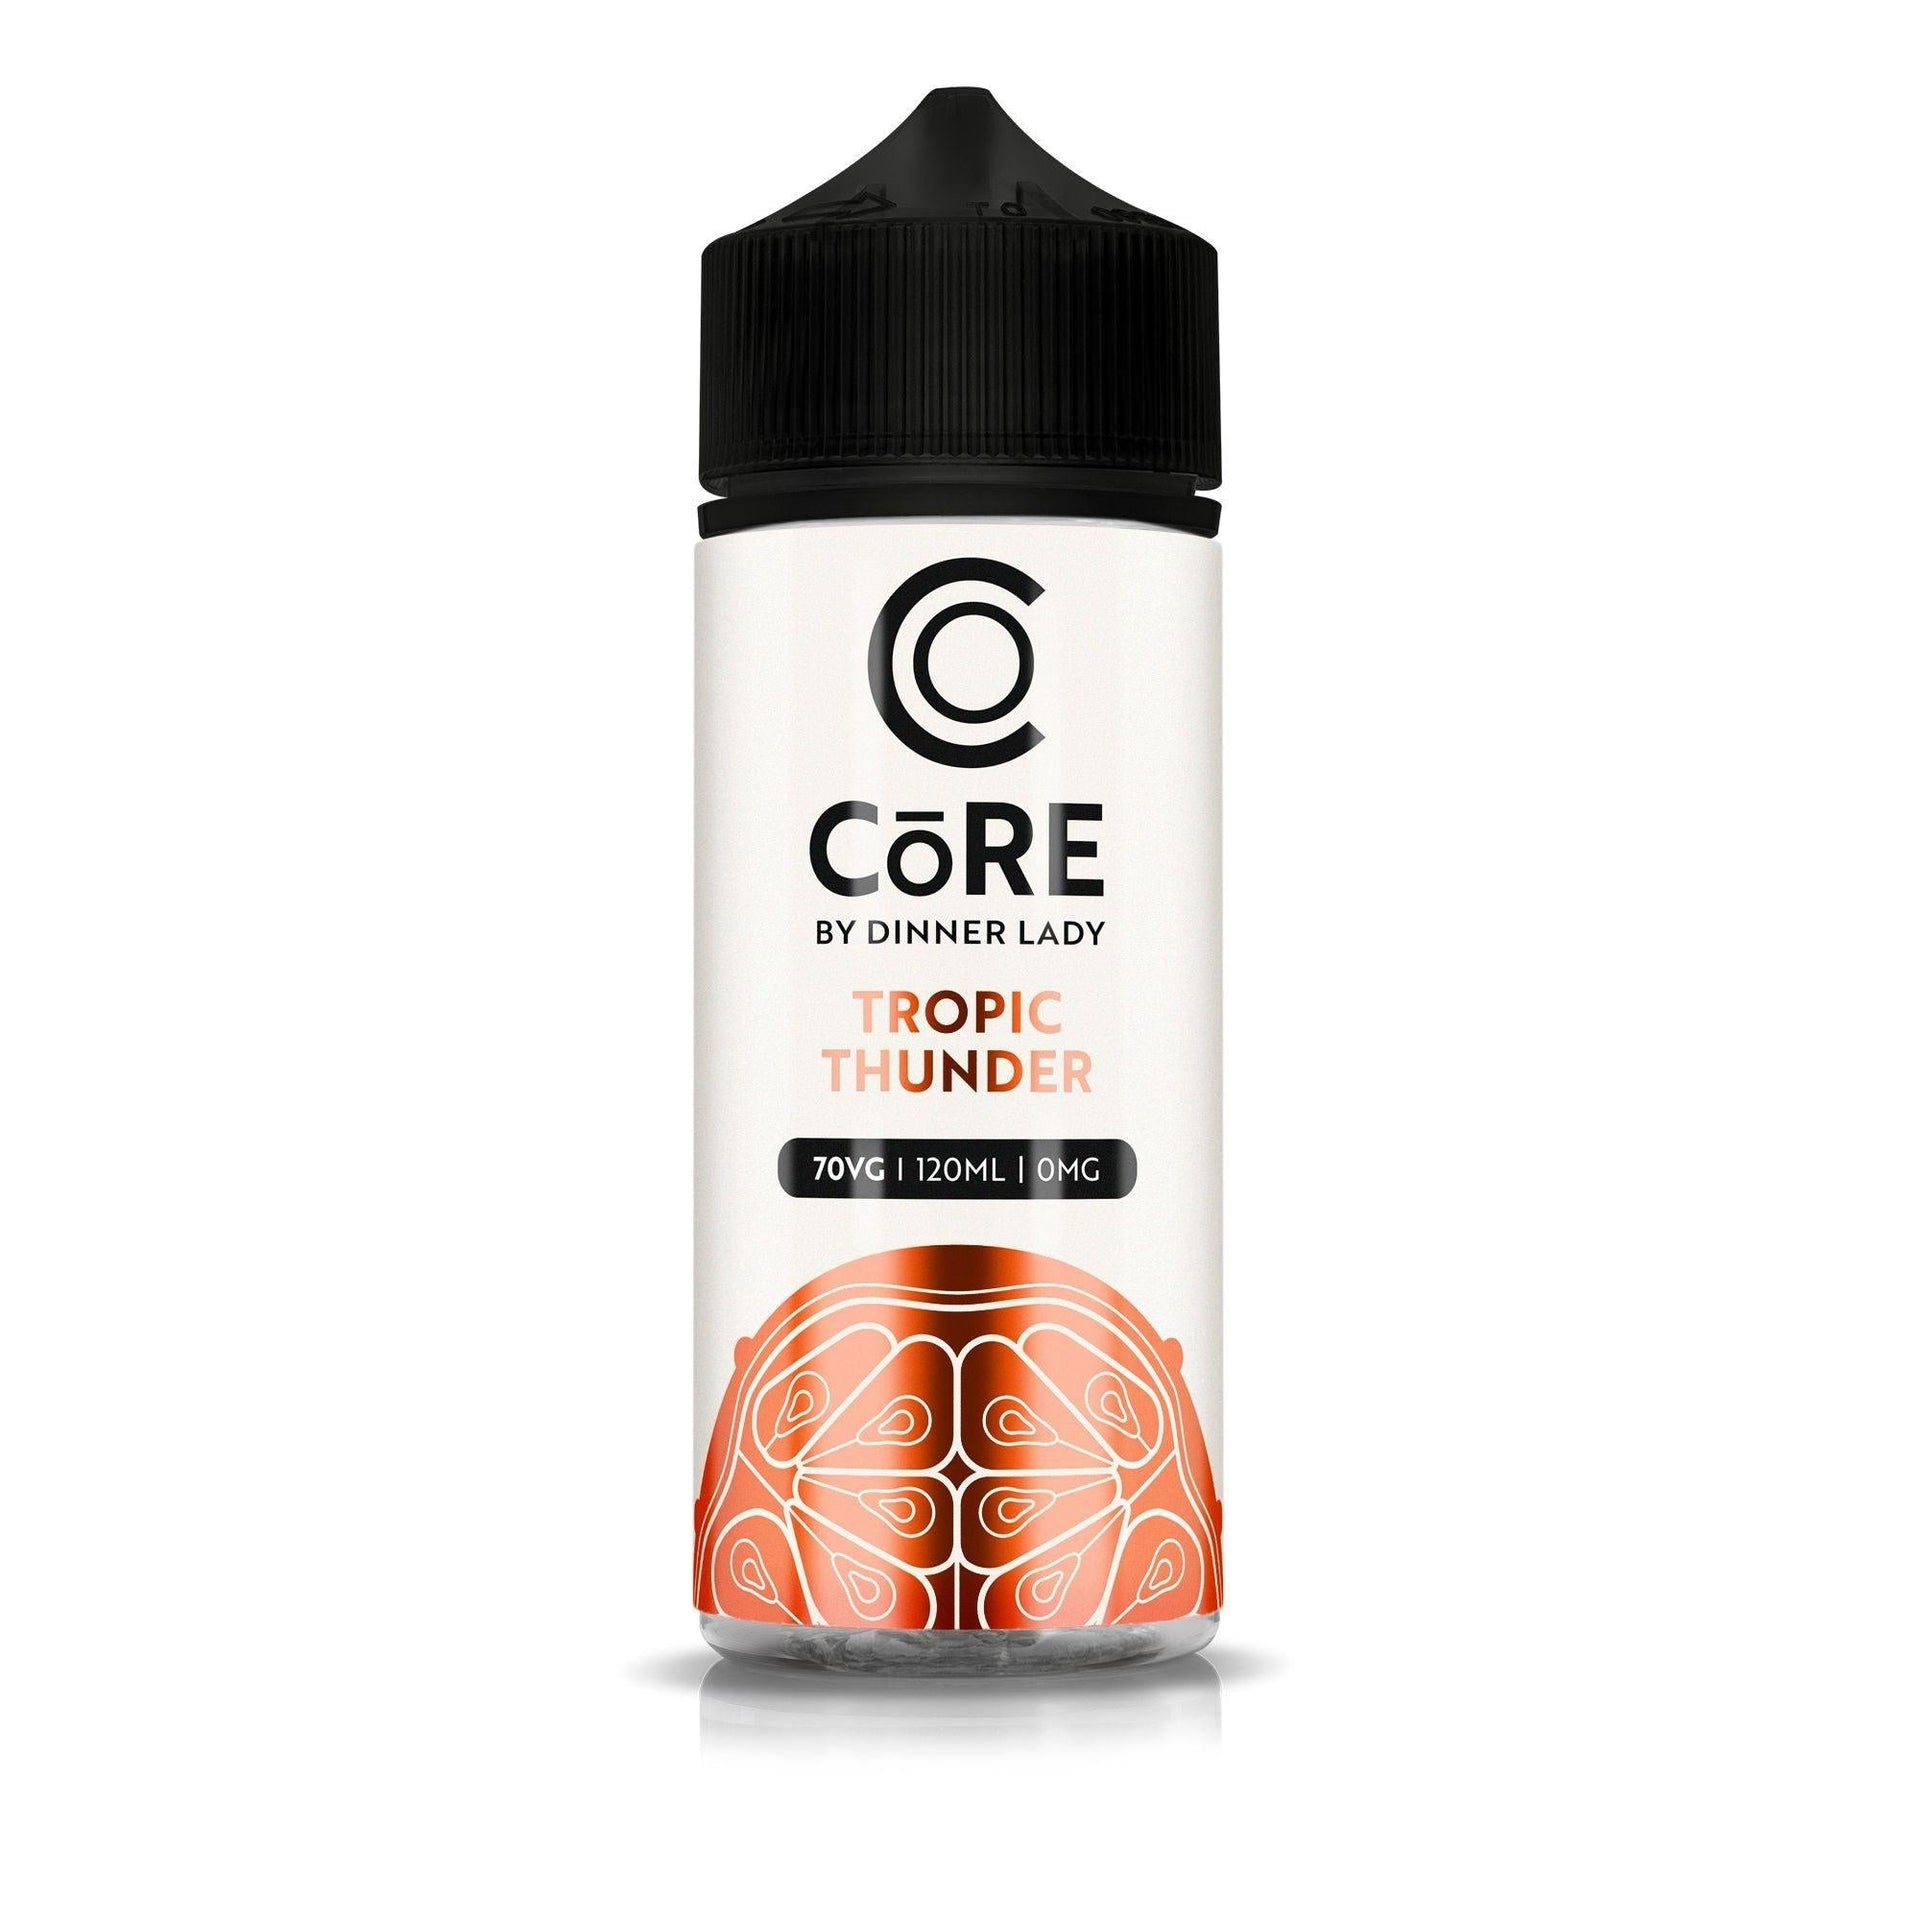 CORE by Dinner Lady - Tropic Thunder - The Vape Store